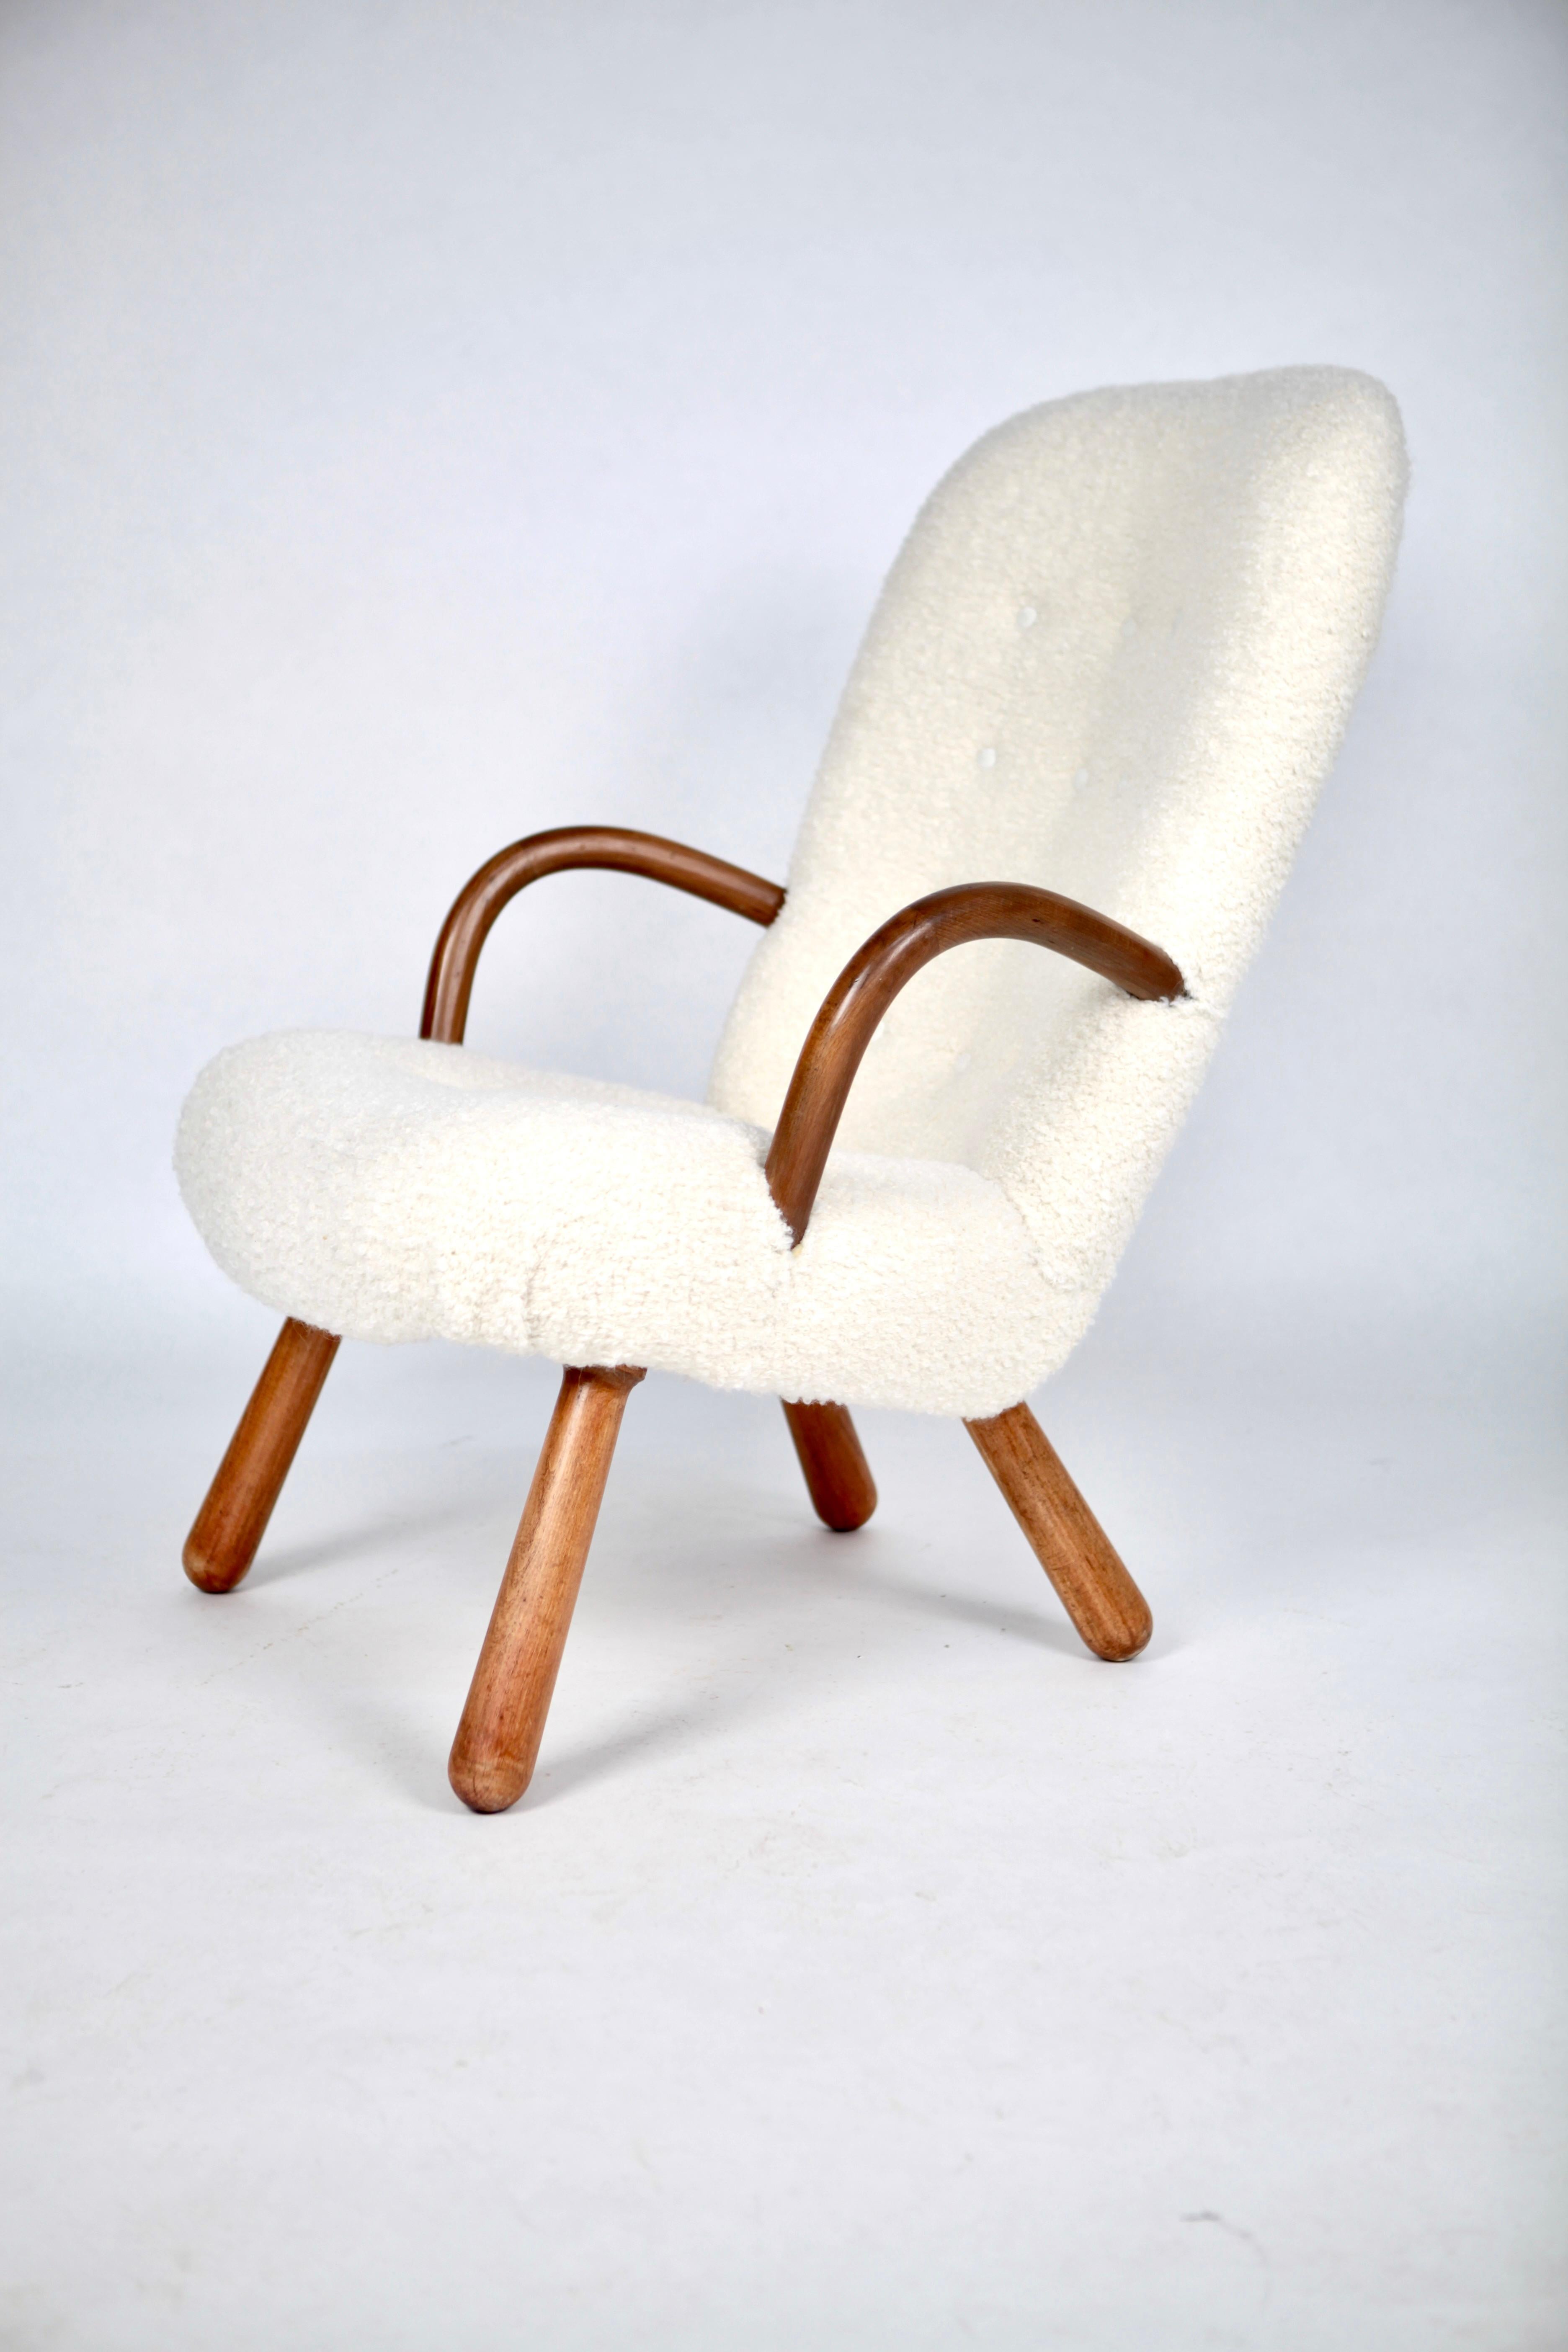 Mid-20th Century 'Clam' Chair by Arnold Madsen for Madsen & Schubell, Denmark, 1944